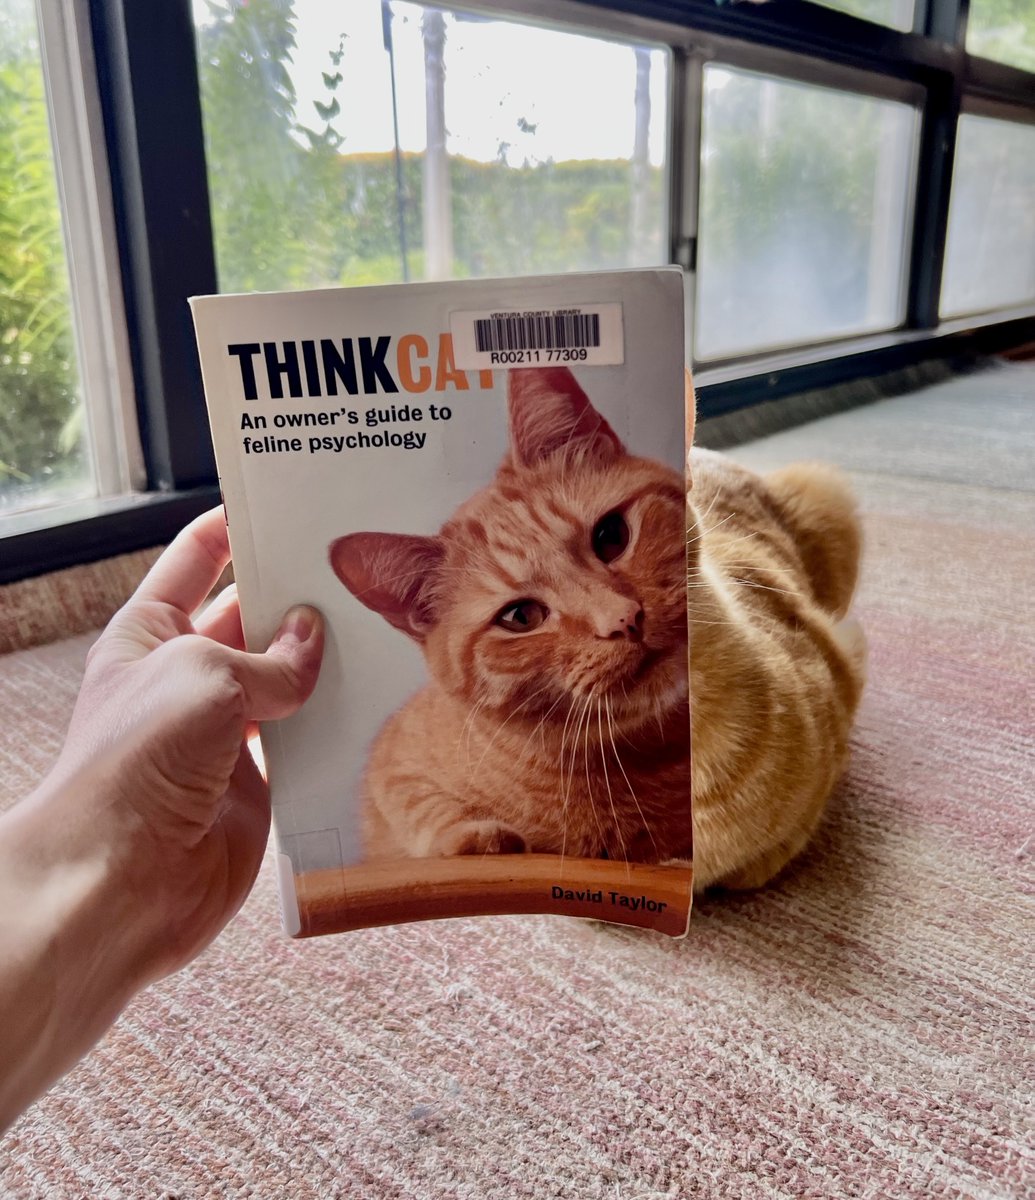 We're back with another #BookFace Friday! Today, we have a special guest, Charlie, who will help us highlight the book Think Cat: An Owner's Guide to Feline Psychology by David Taylor!

#bookfacefriday #camarillolibrary #library